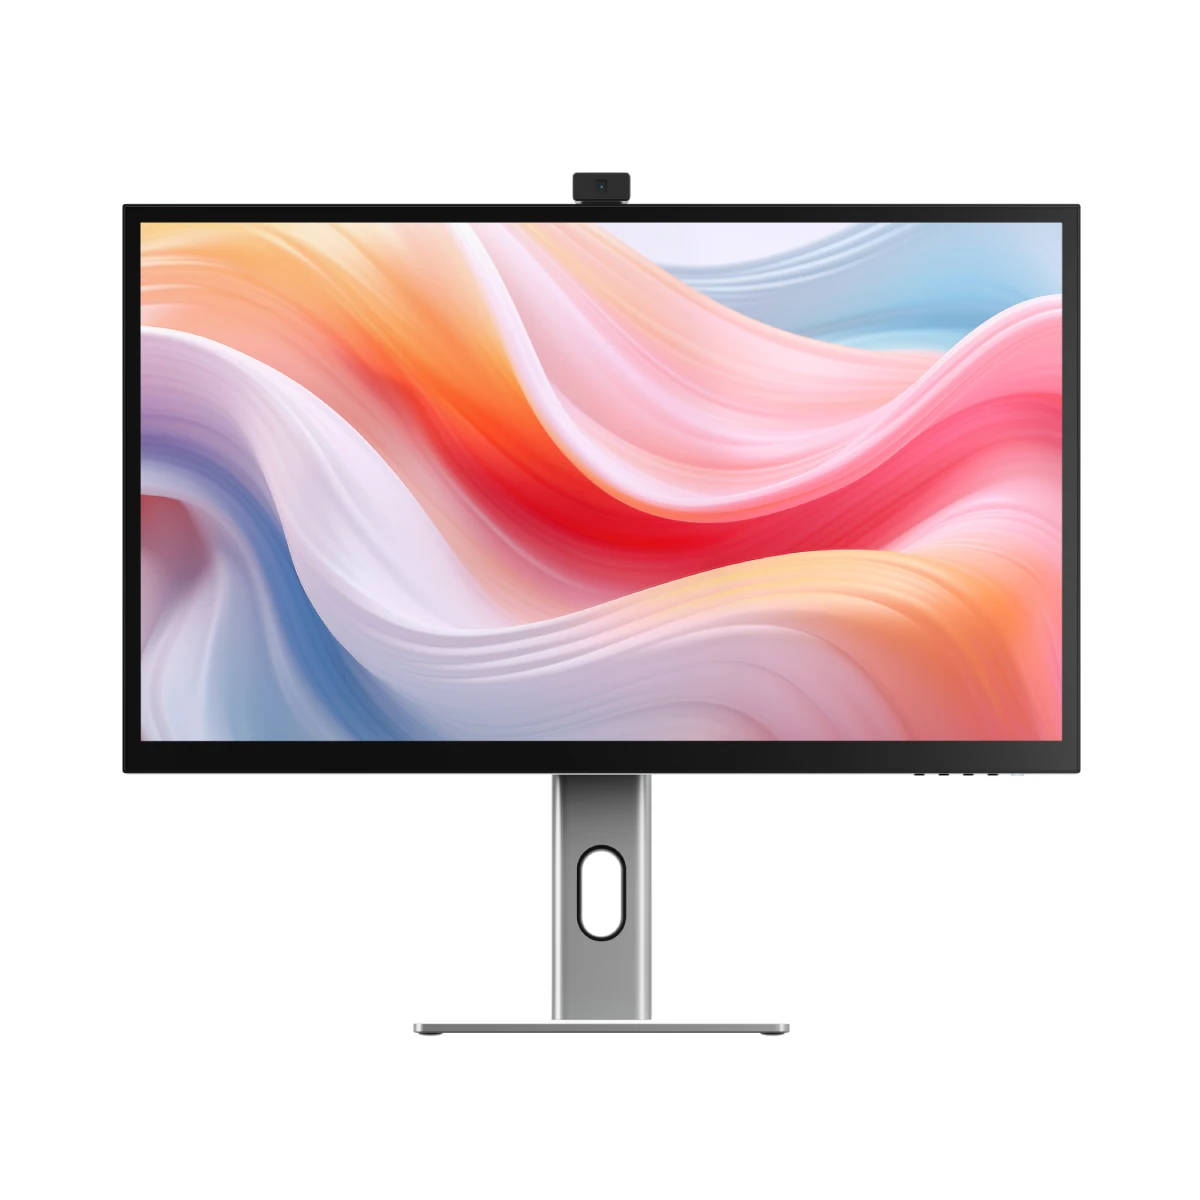 clarity-pro-27-uhd-4k-monitor-with-65w-pd-and-webcam-thunderbolt-4-blaze-docking-station2